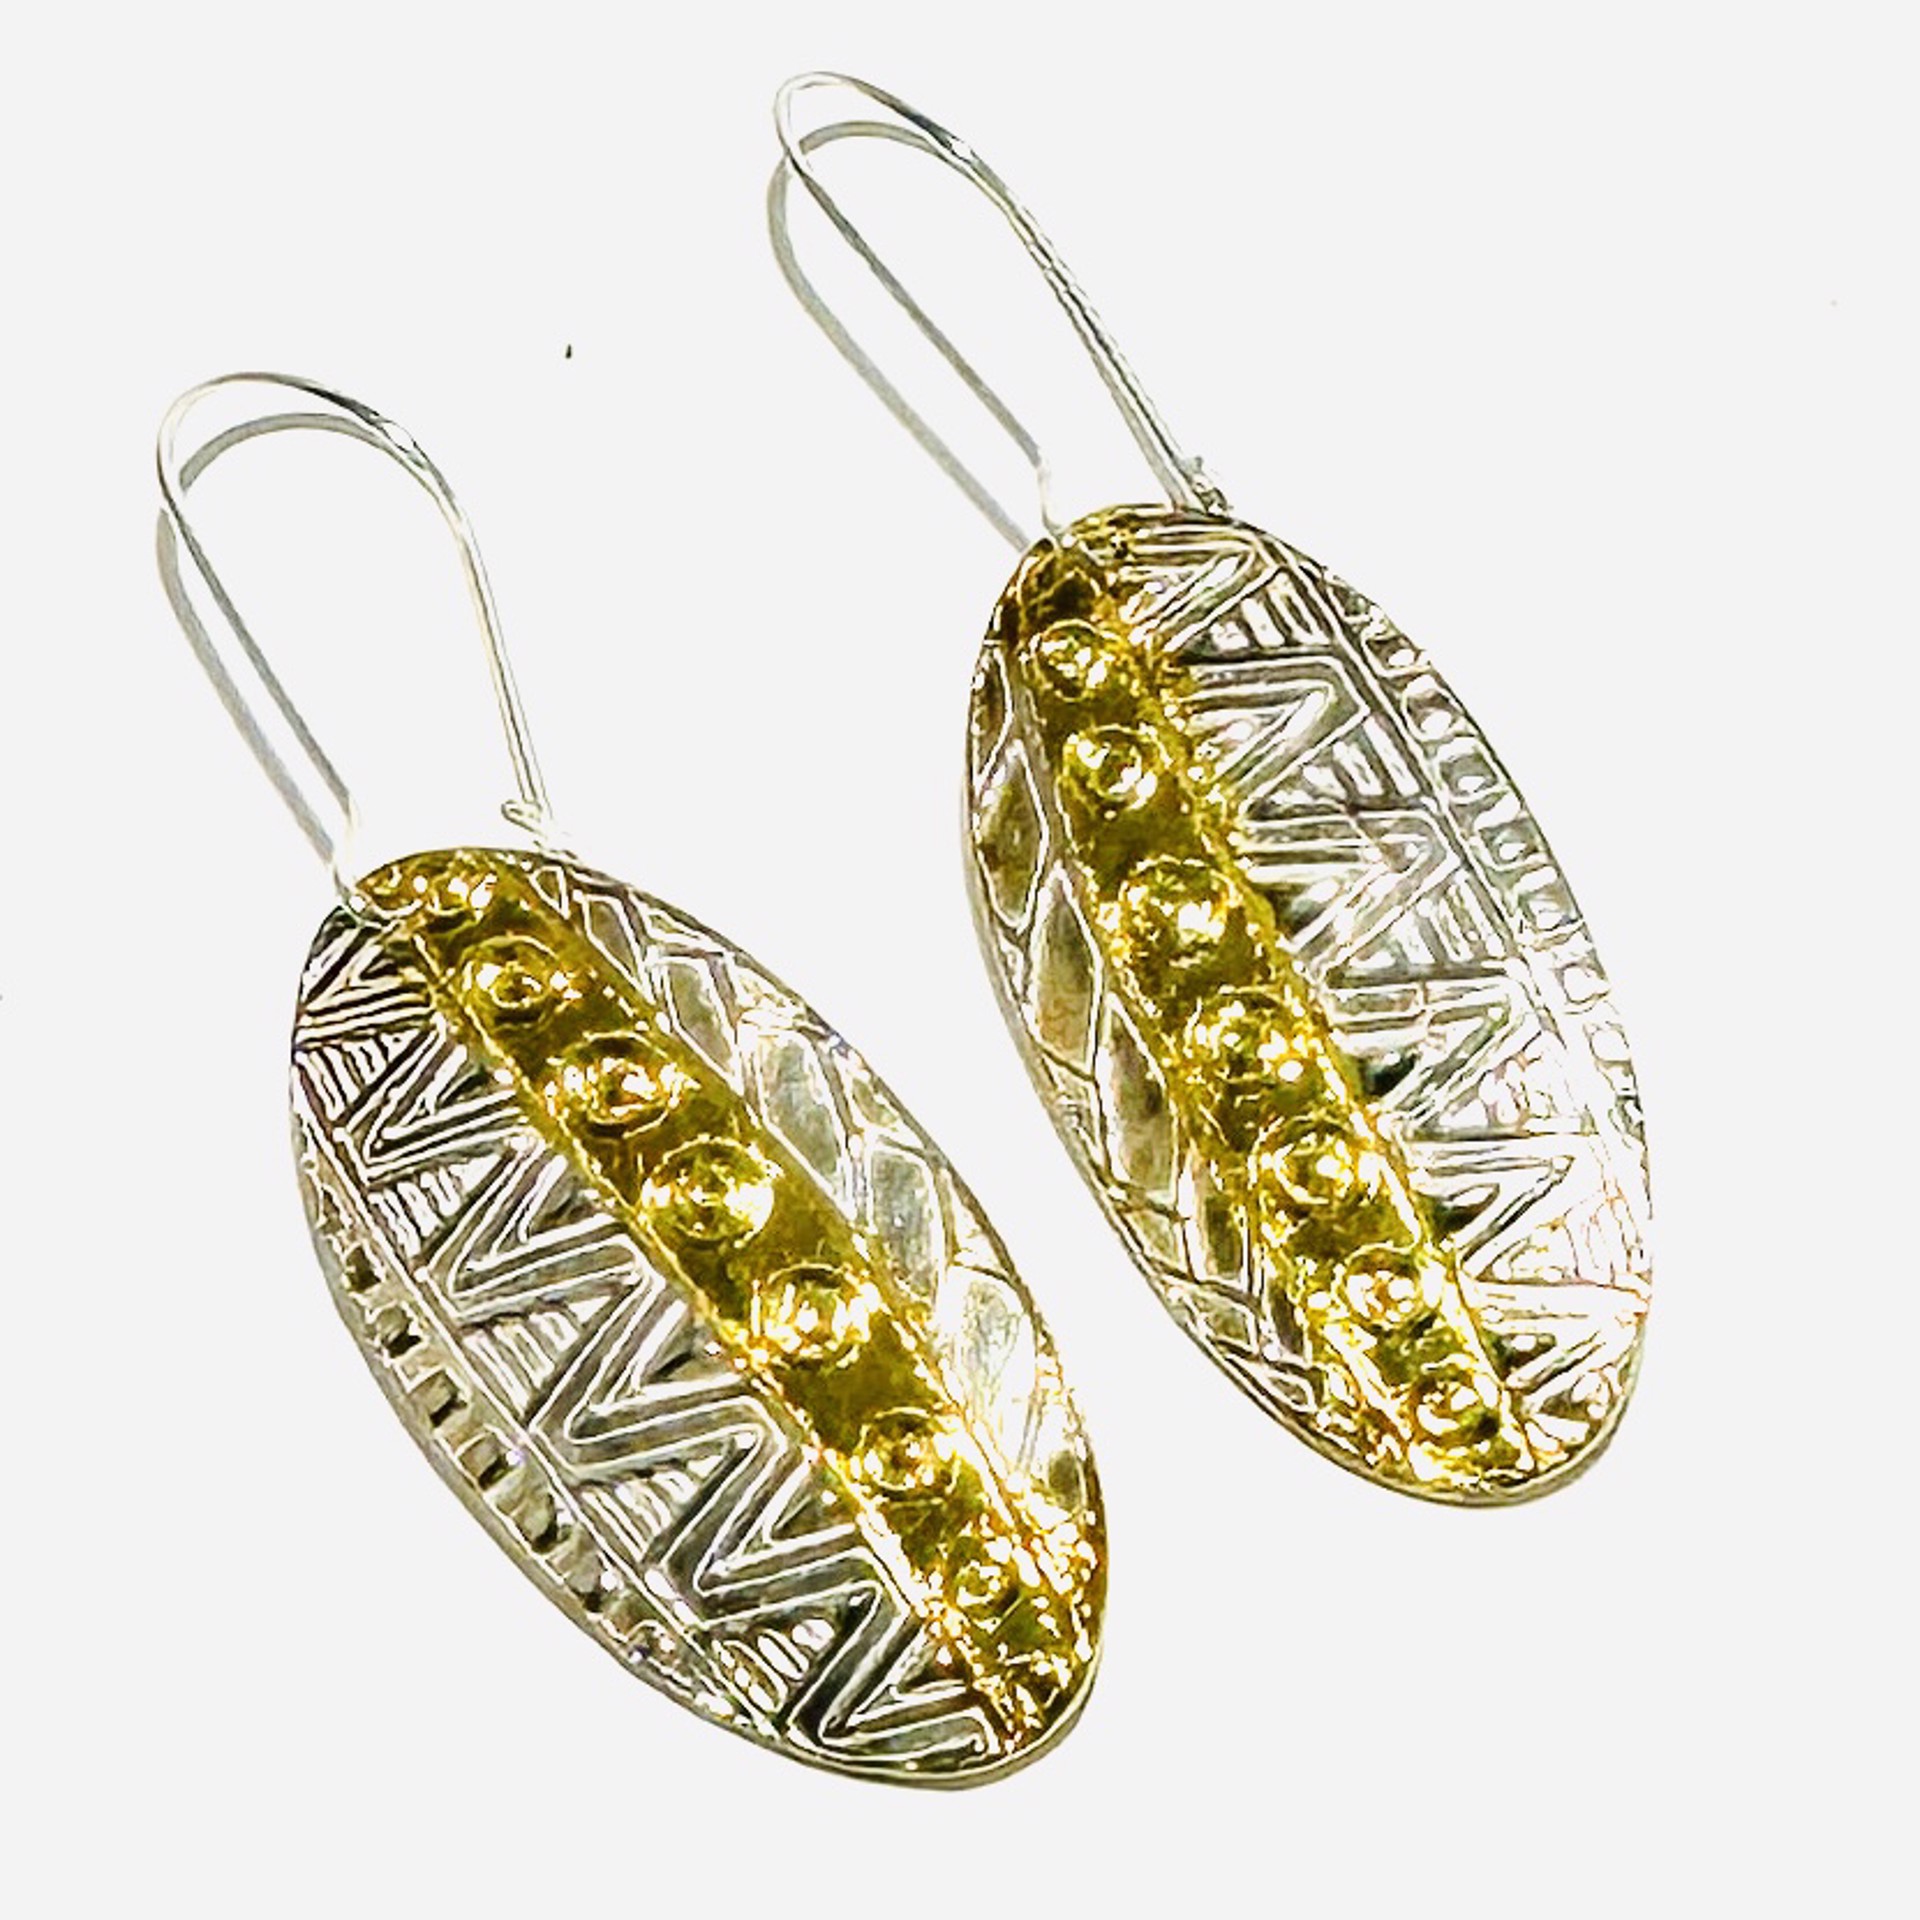 Keum-boo Fine Silver and Gold Oval Earrings KH23-34 by Karen Hakim